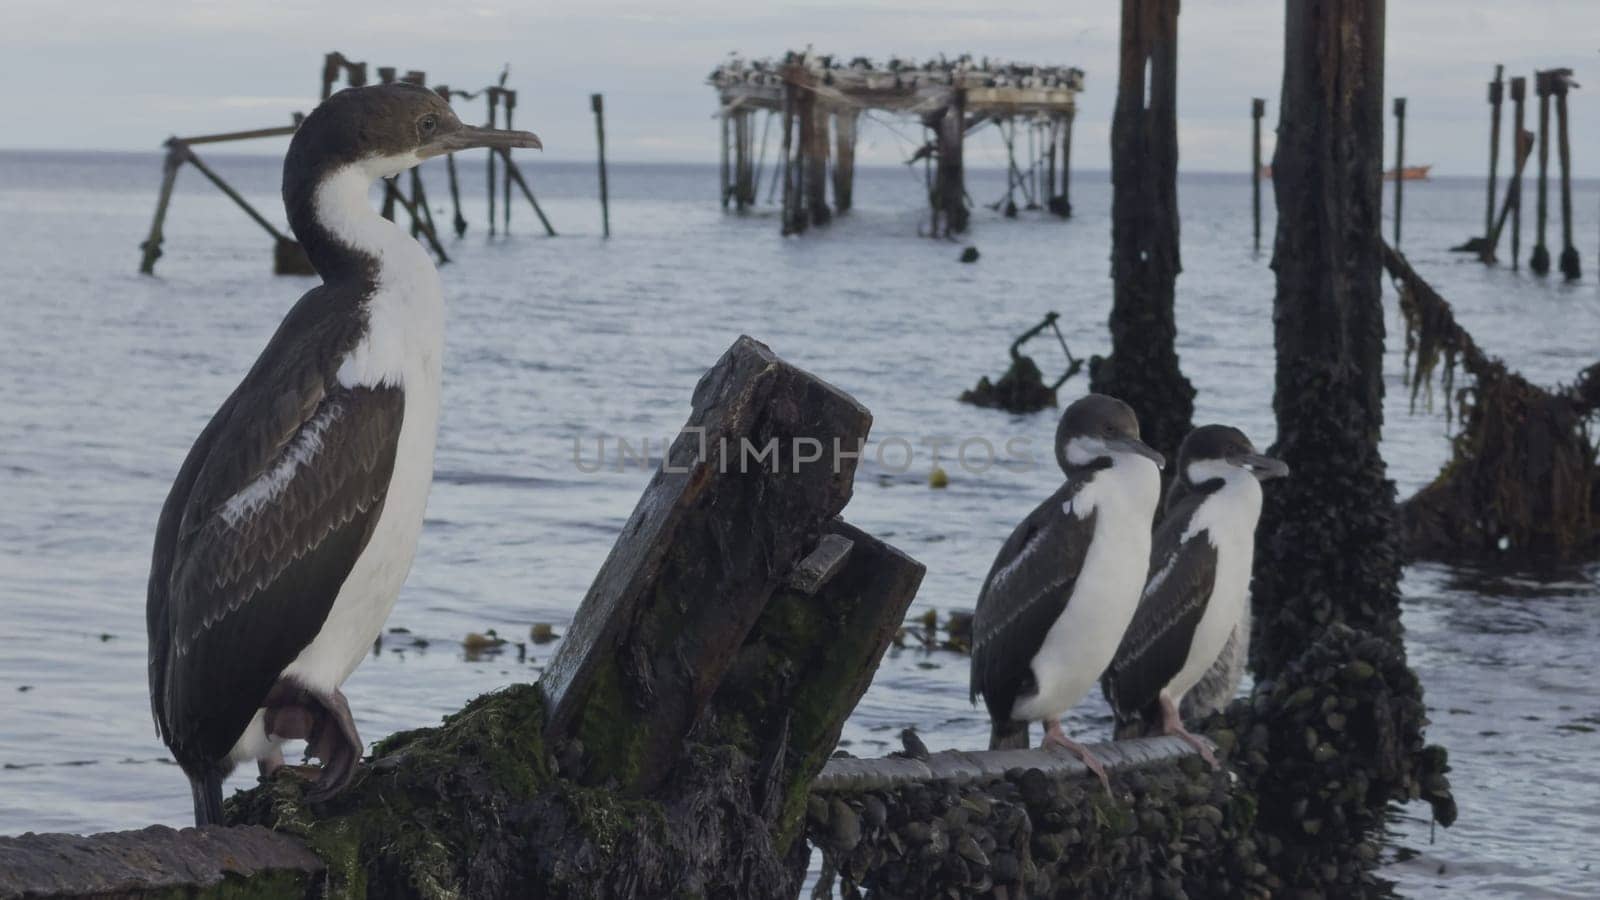 Lone Cormorant Perches on an Old Wooden Pier by the Sea by FerradalFCG